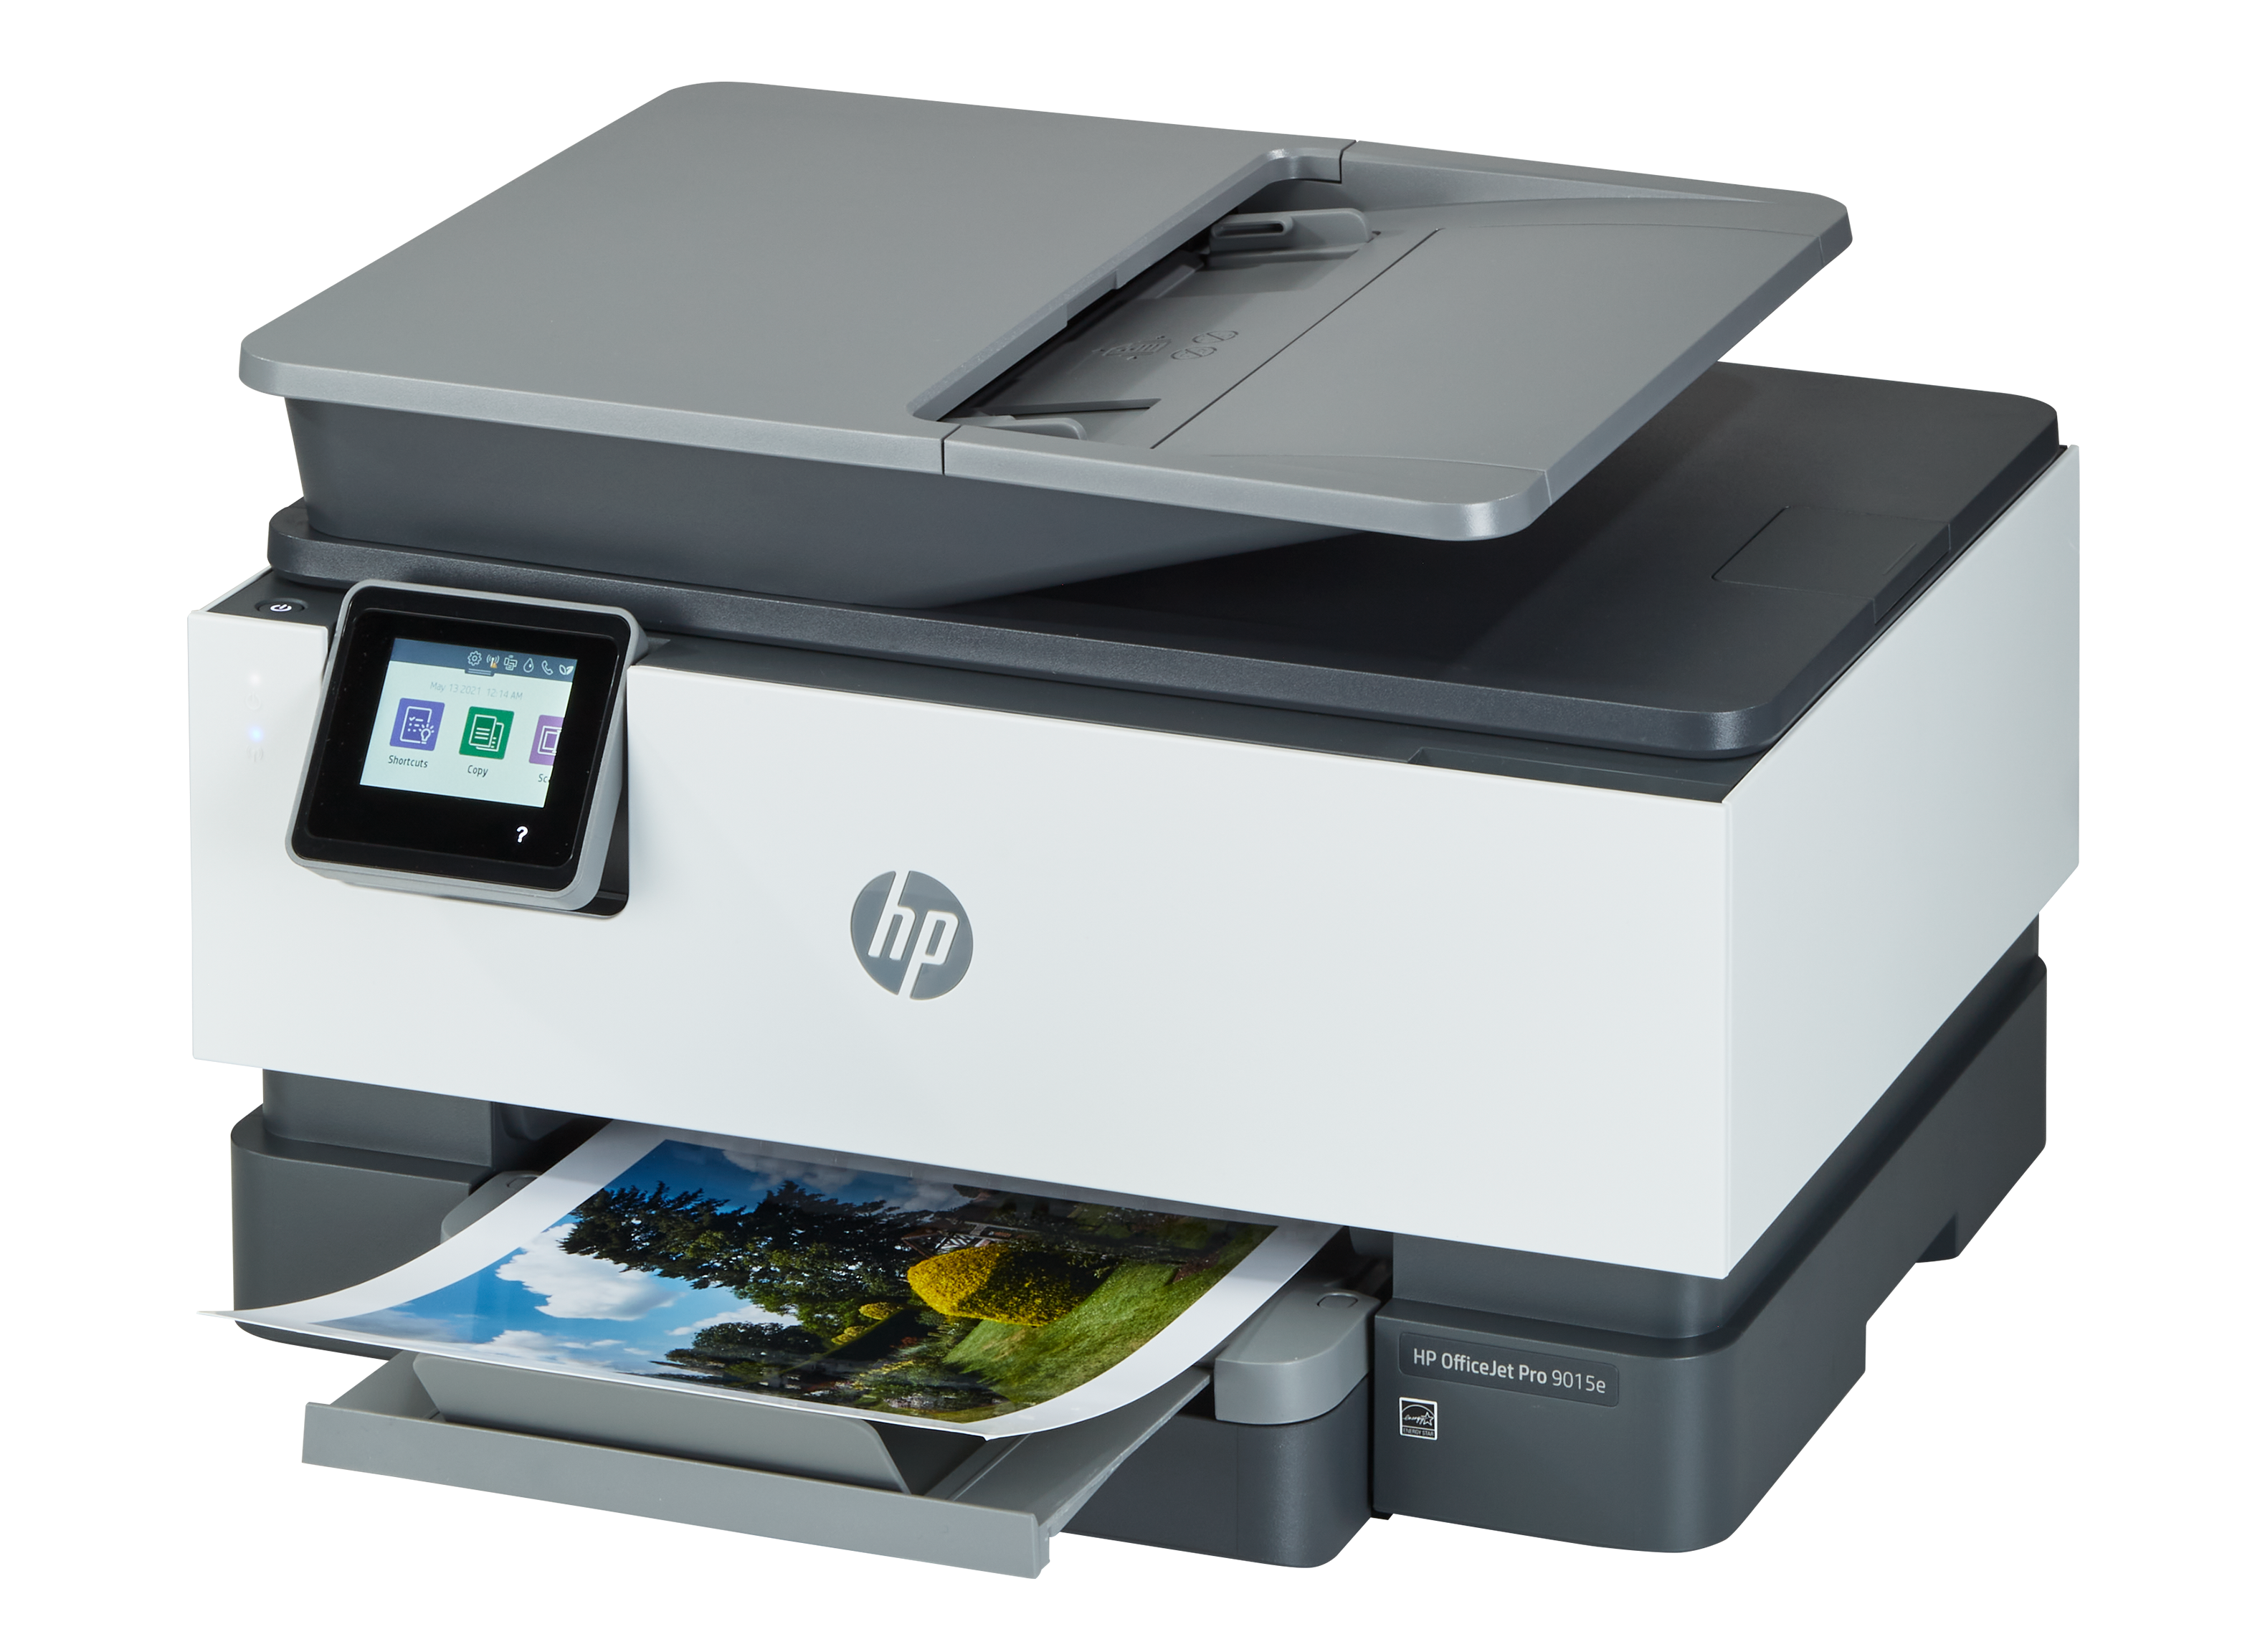 HP Officejet Pro 9015e Printer Review - Consumer Reports